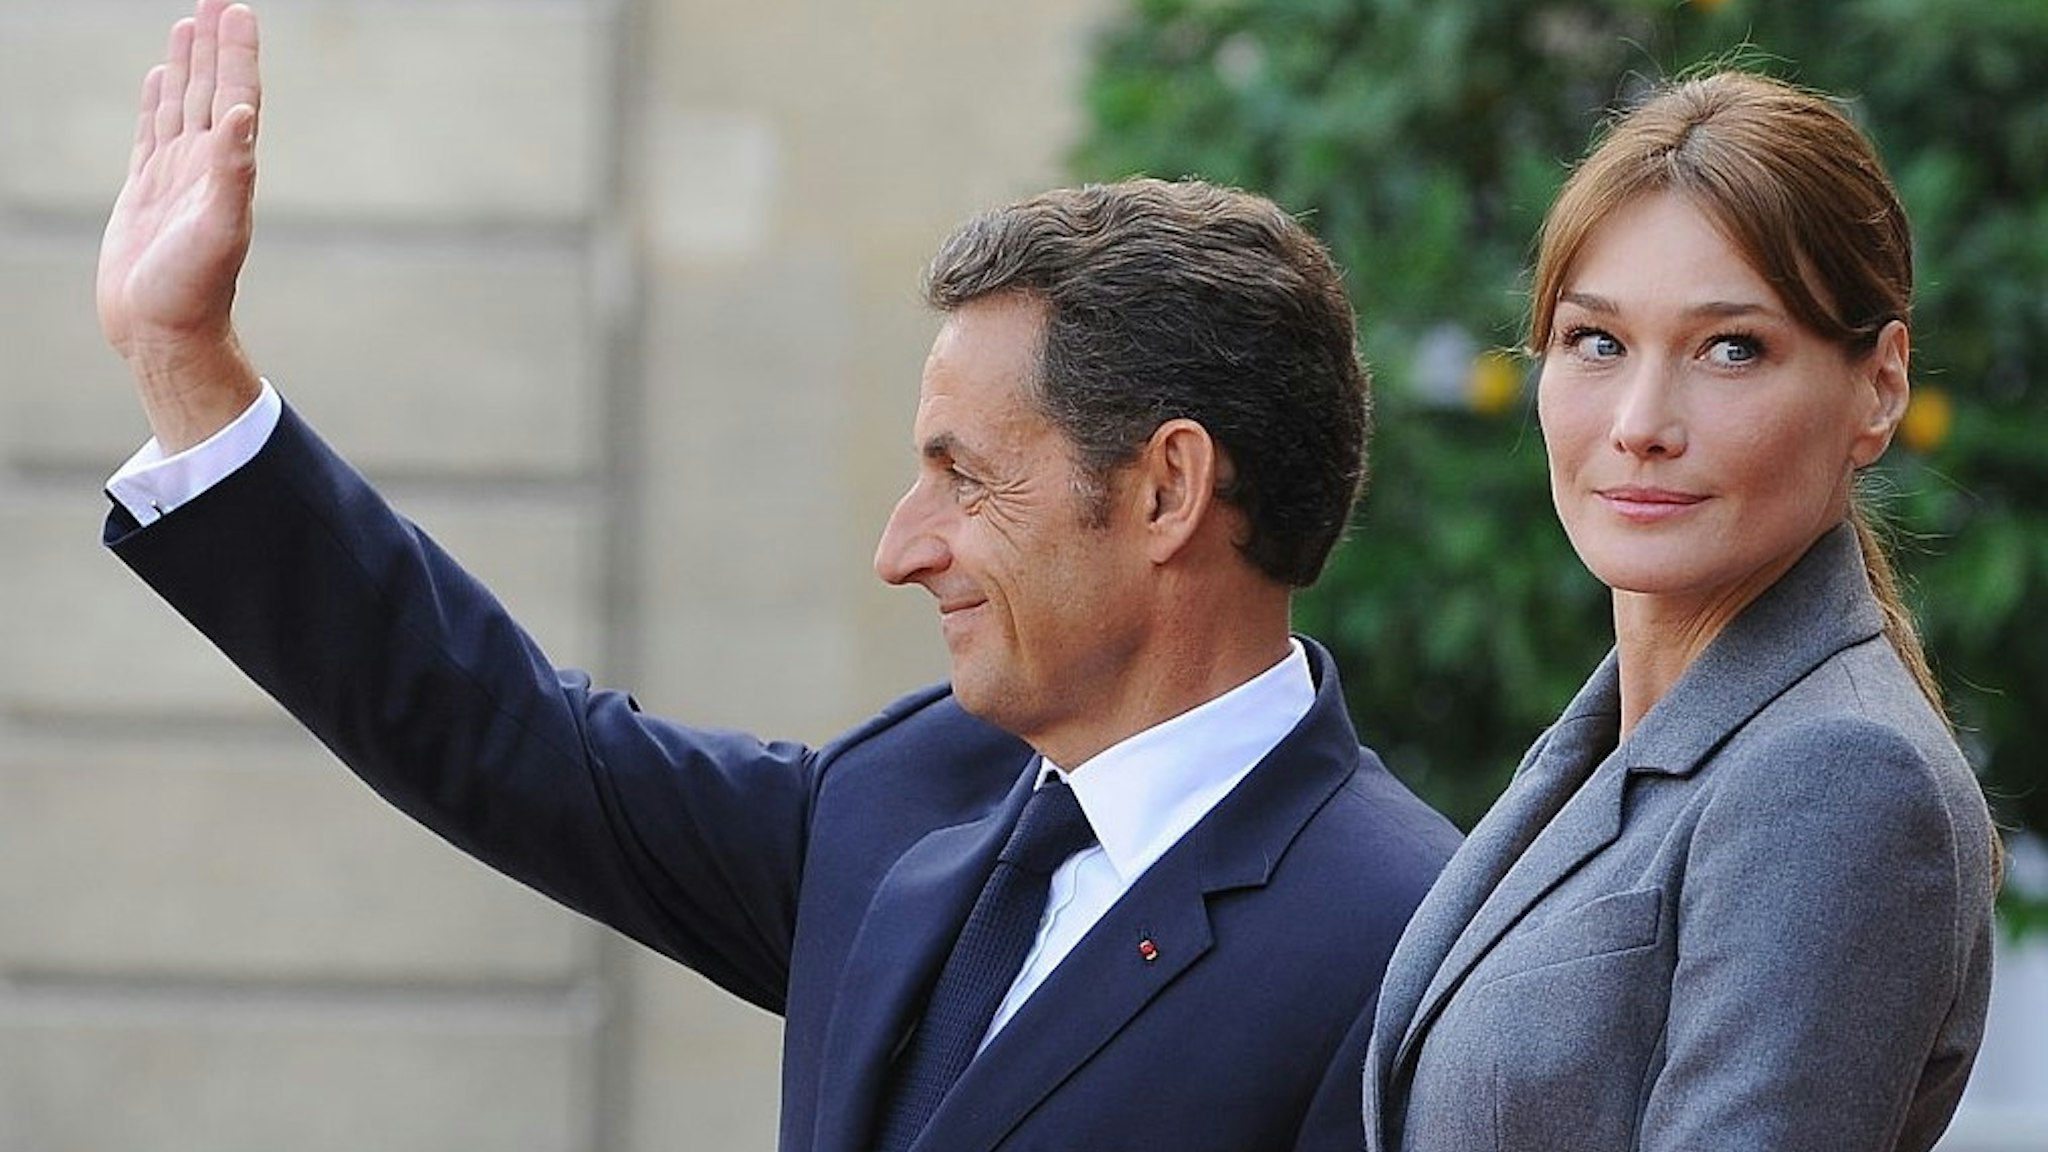 French President Nicolas Sarkozy and First Lady Carla Bruni-Sarkozy stand on the red carpet outside the Elysee Palace as Pope Benedict XVI departs. (Photo by